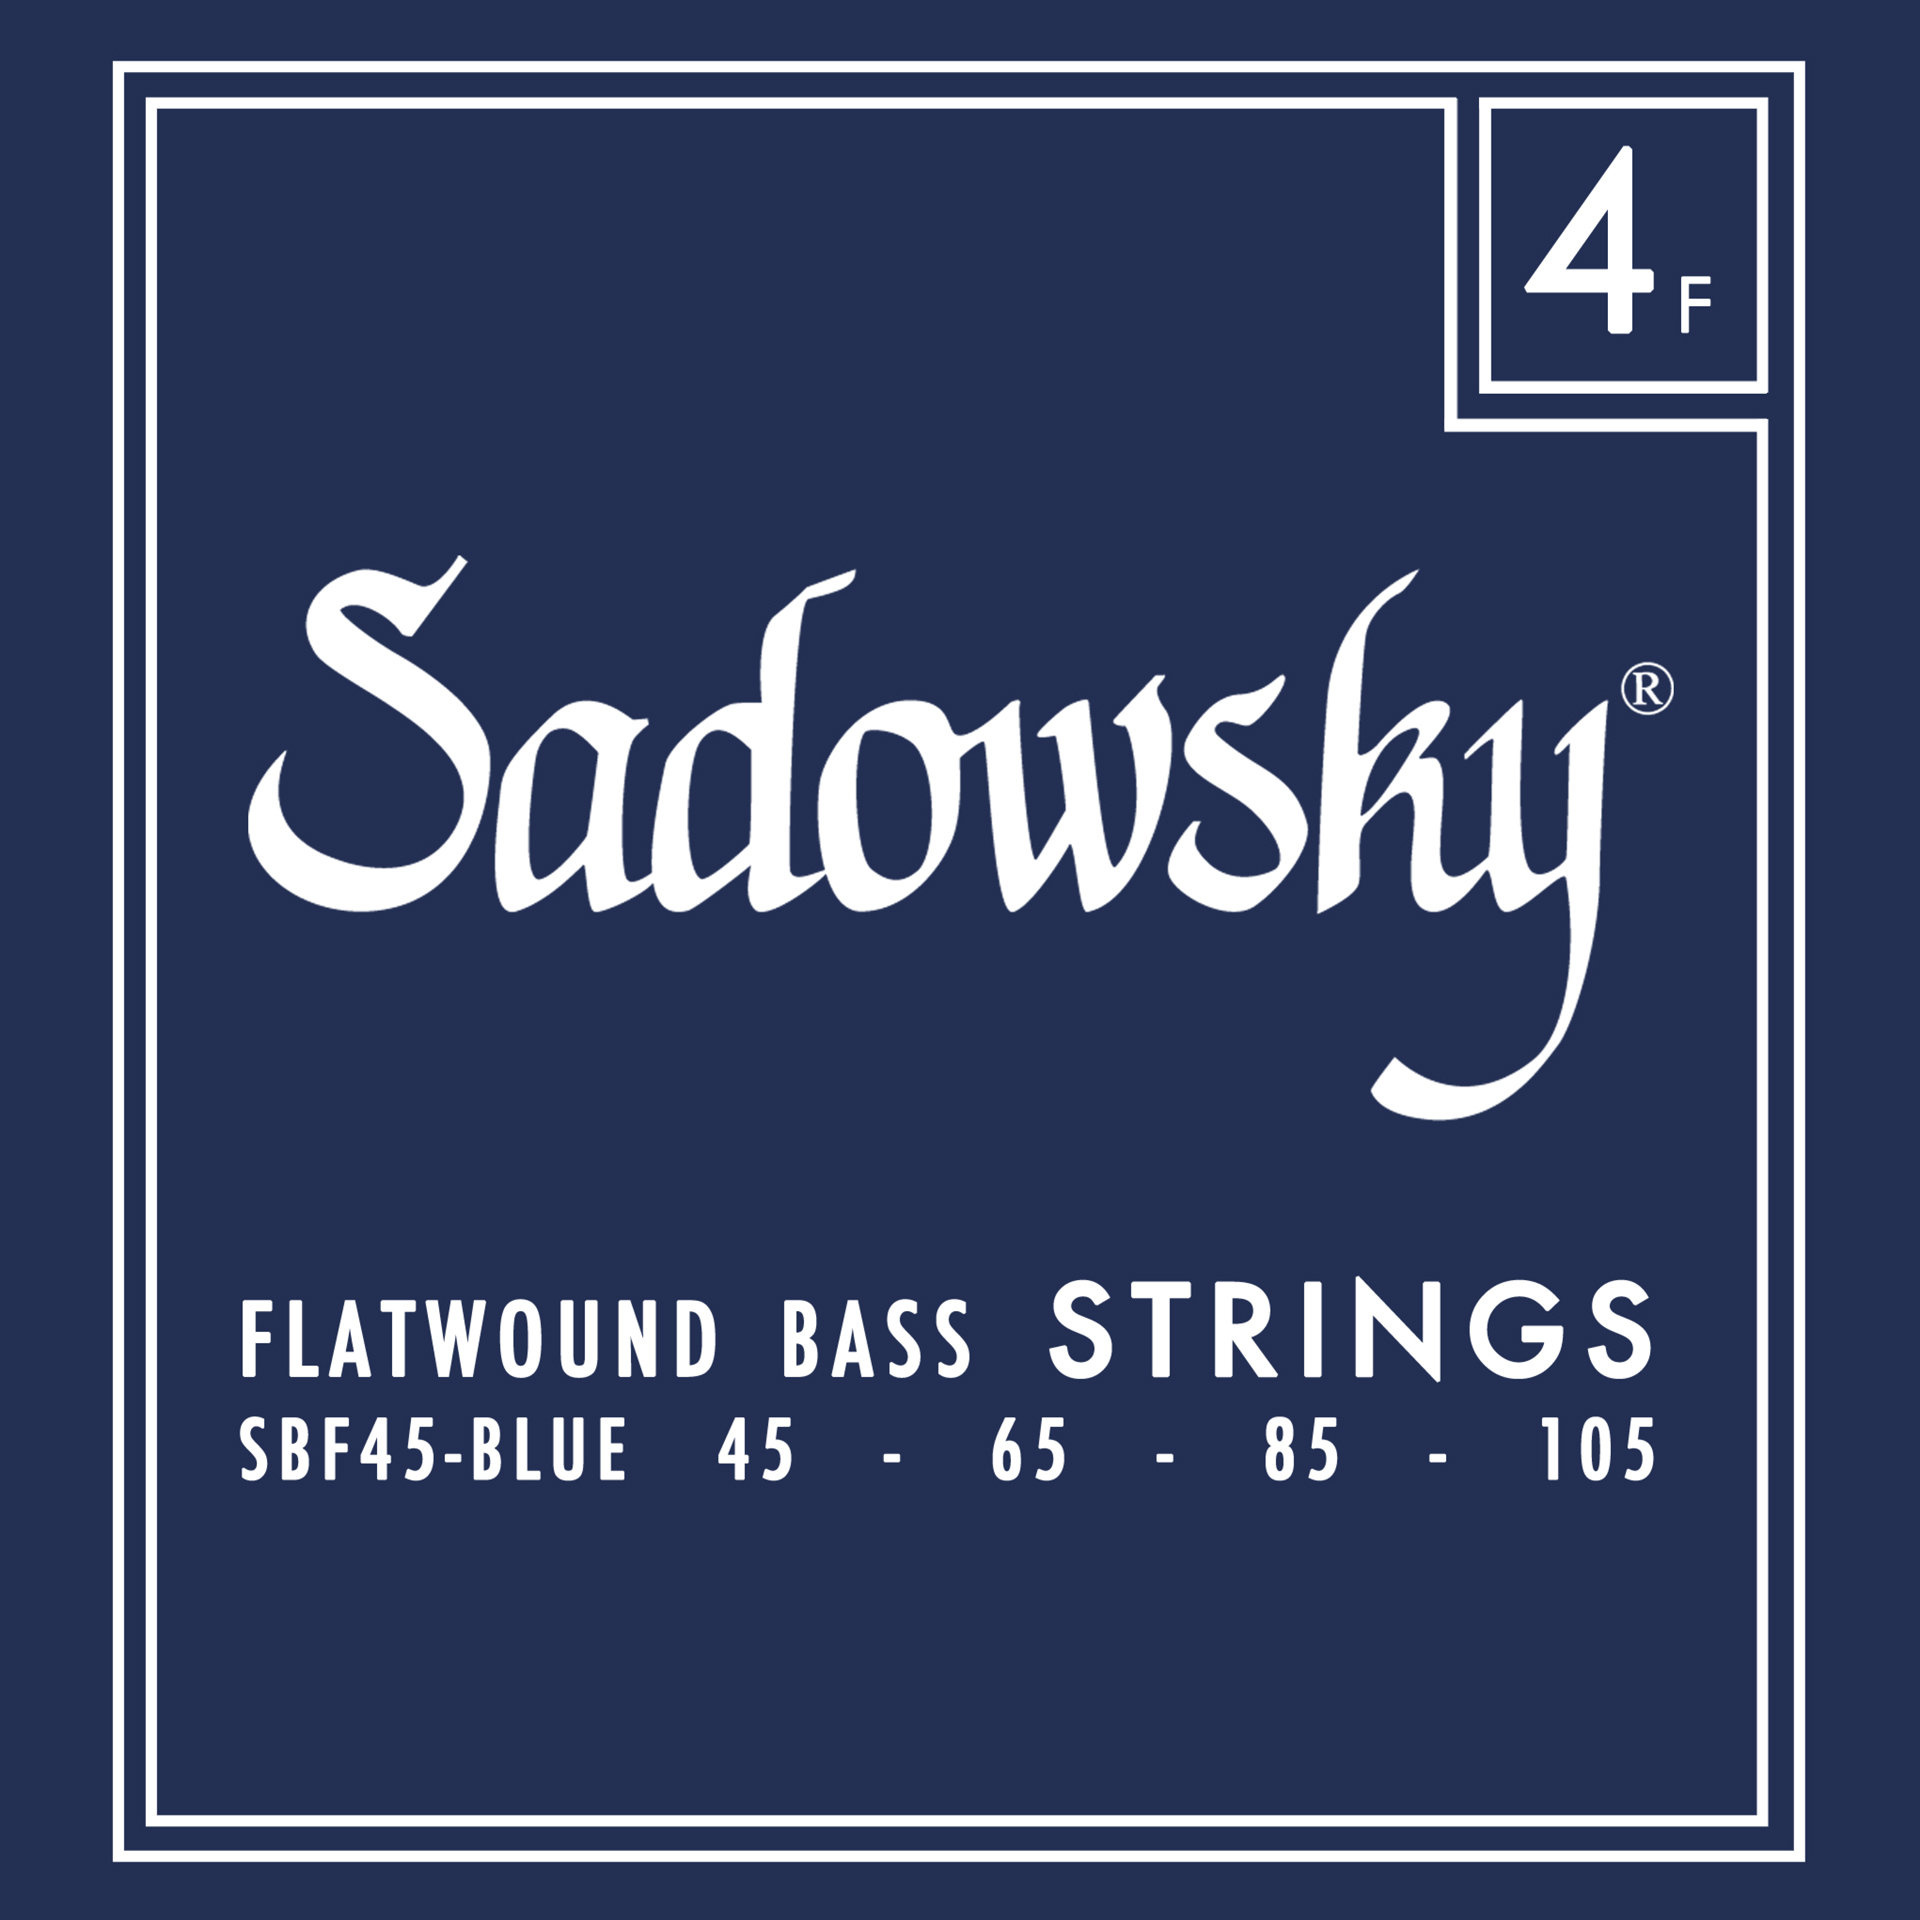 Sadowsky Blue Label Bass Strings, Stainless Steel Flatwound, 4-String Set (045-105)